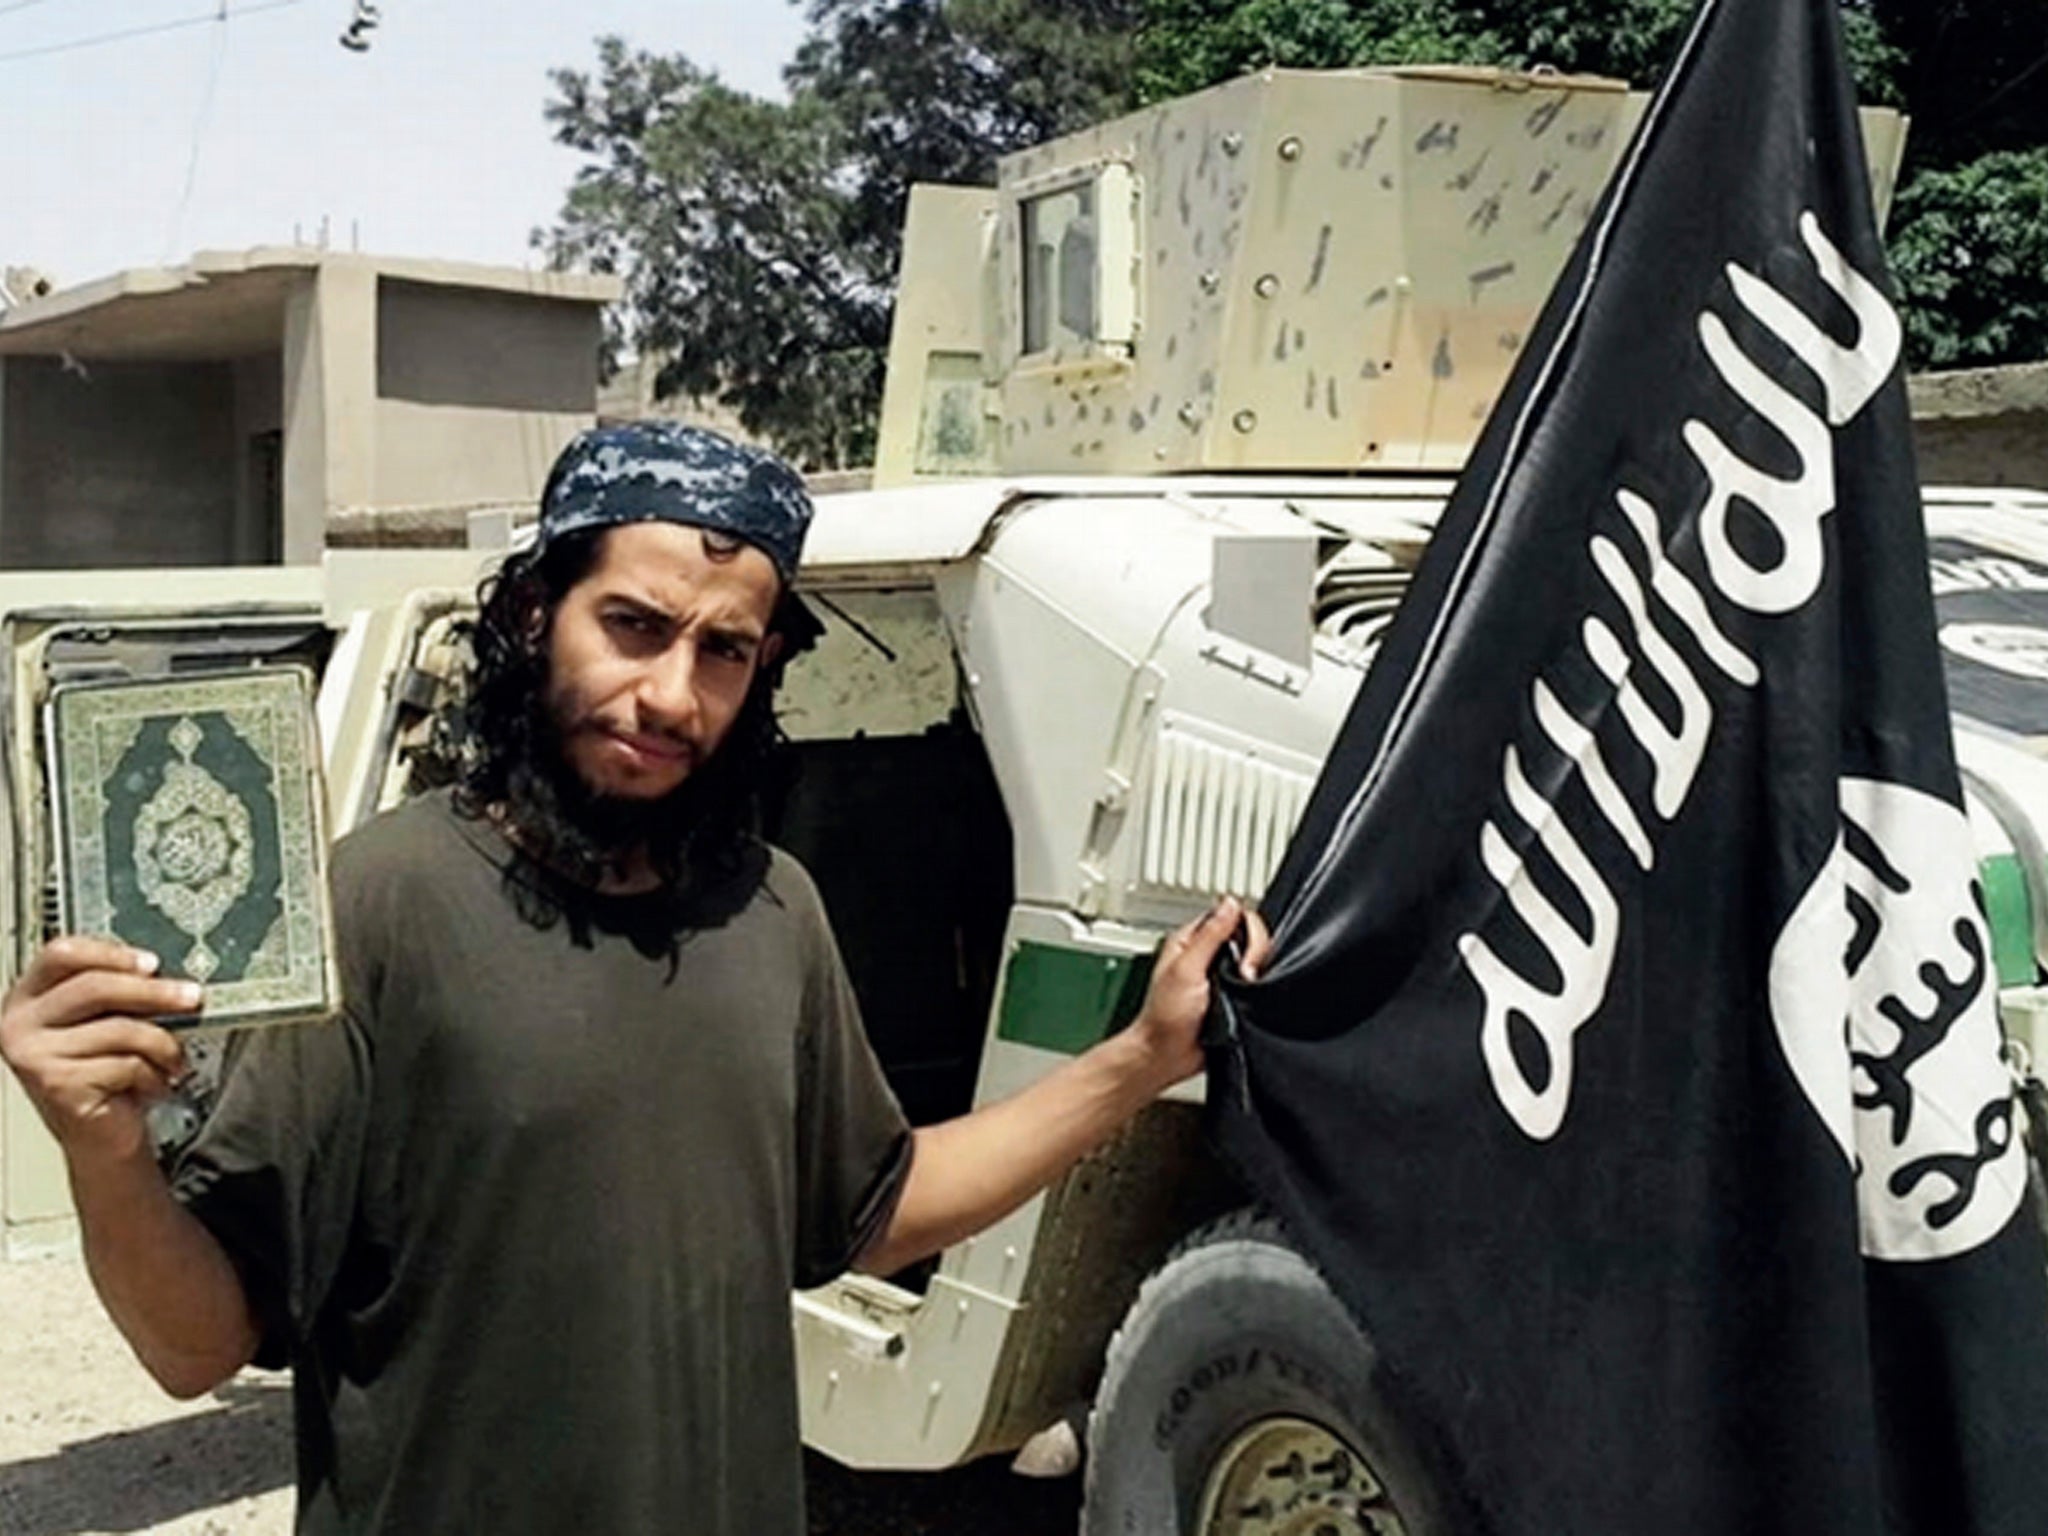 Abdelhamid Abaaoud was killed in a firefight with police in the Paris suburb of Saint-Denis